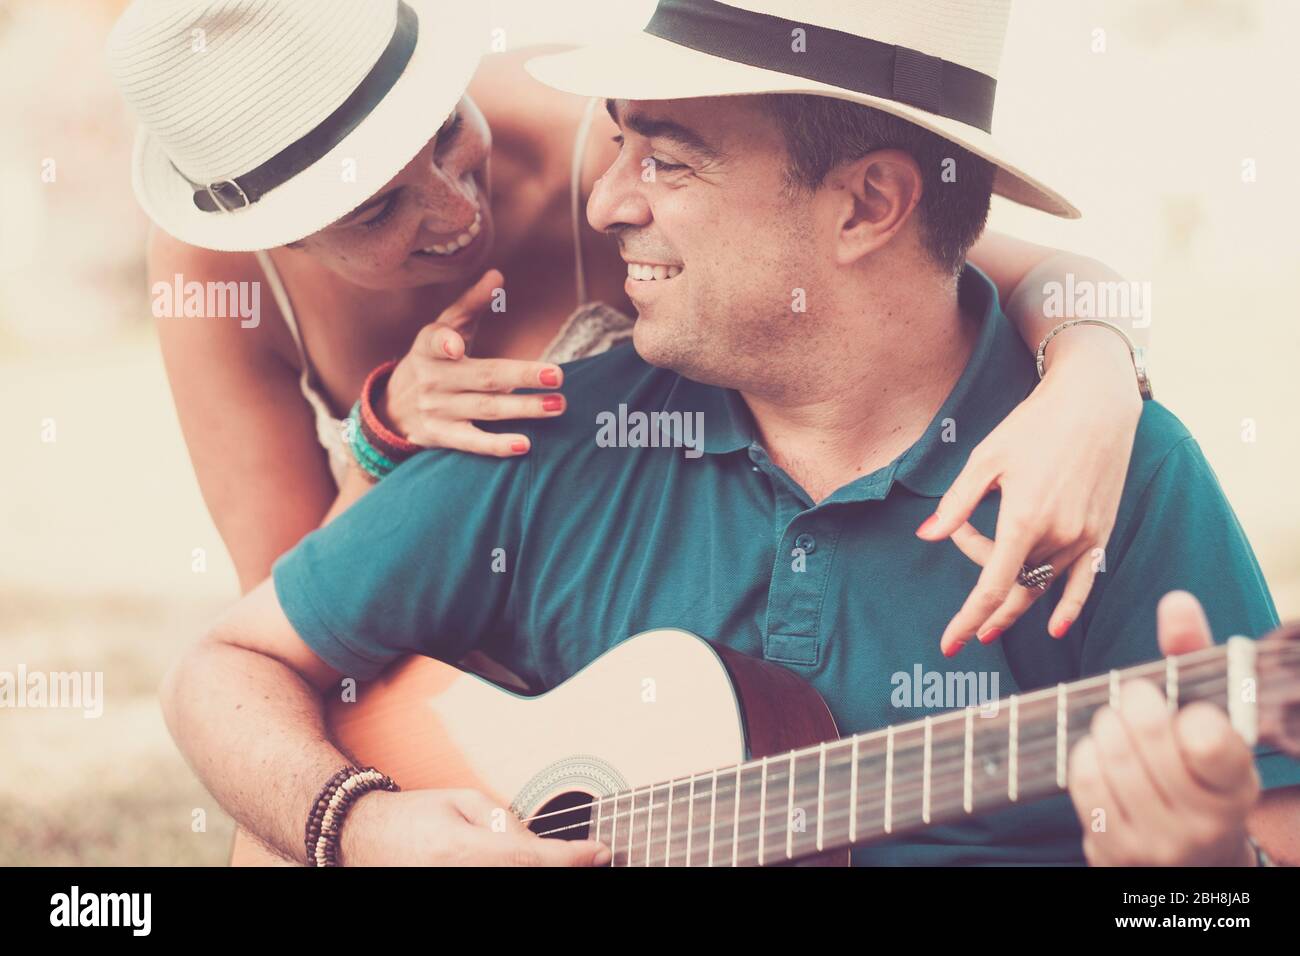 Romantic hug an colors with cheerful happy middle age people in love playing a guitar together looking and smiling - relationship for middle age adult caucasian couple - vintage filter tones Stock Photo